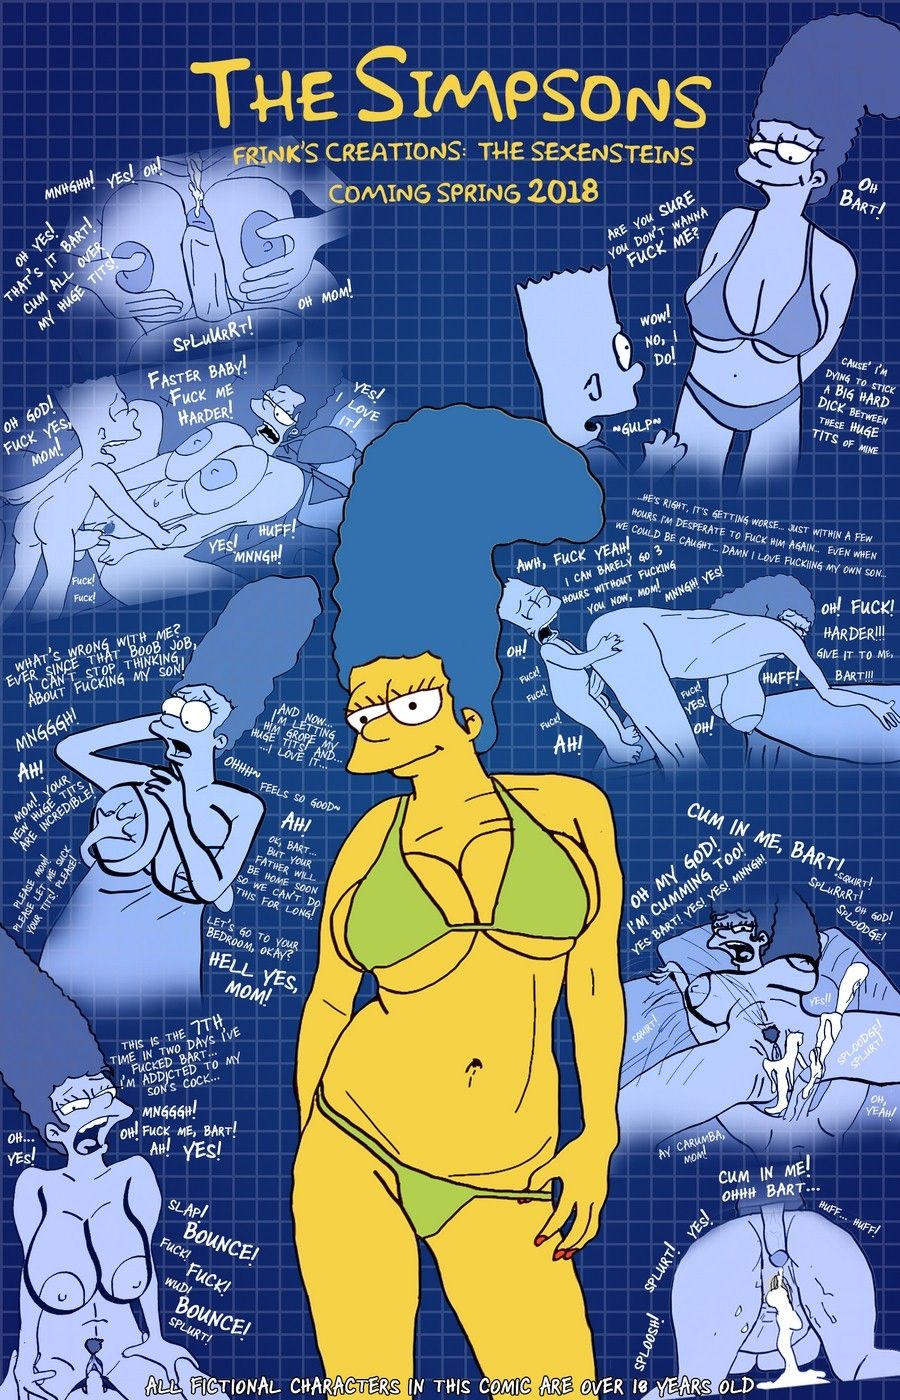 The Simpsons-The Sexenteins